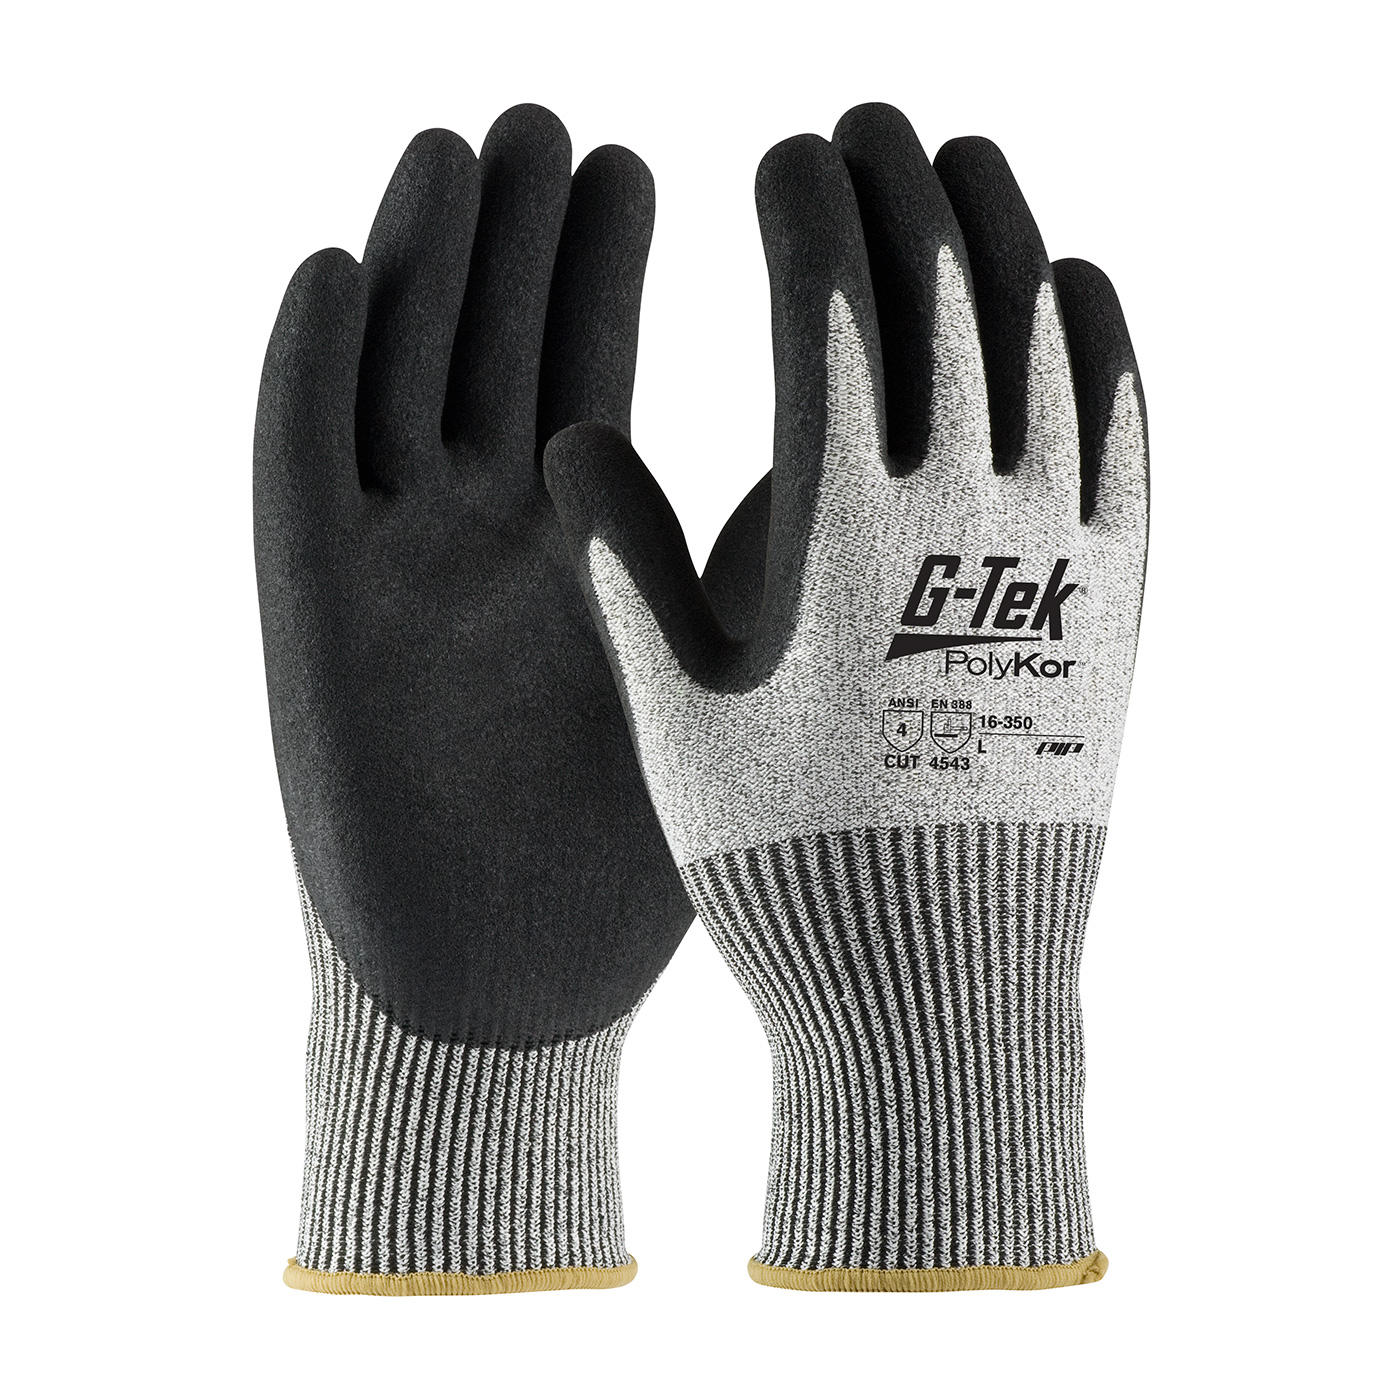 PIP 16-350/M G-Tek PolyKor Seamless Knit PolyKor Blended Glove with Double-Dipped Nitrile Coated MicroSurface Grip on Palm & Fingers - Medium PID-16 350 M